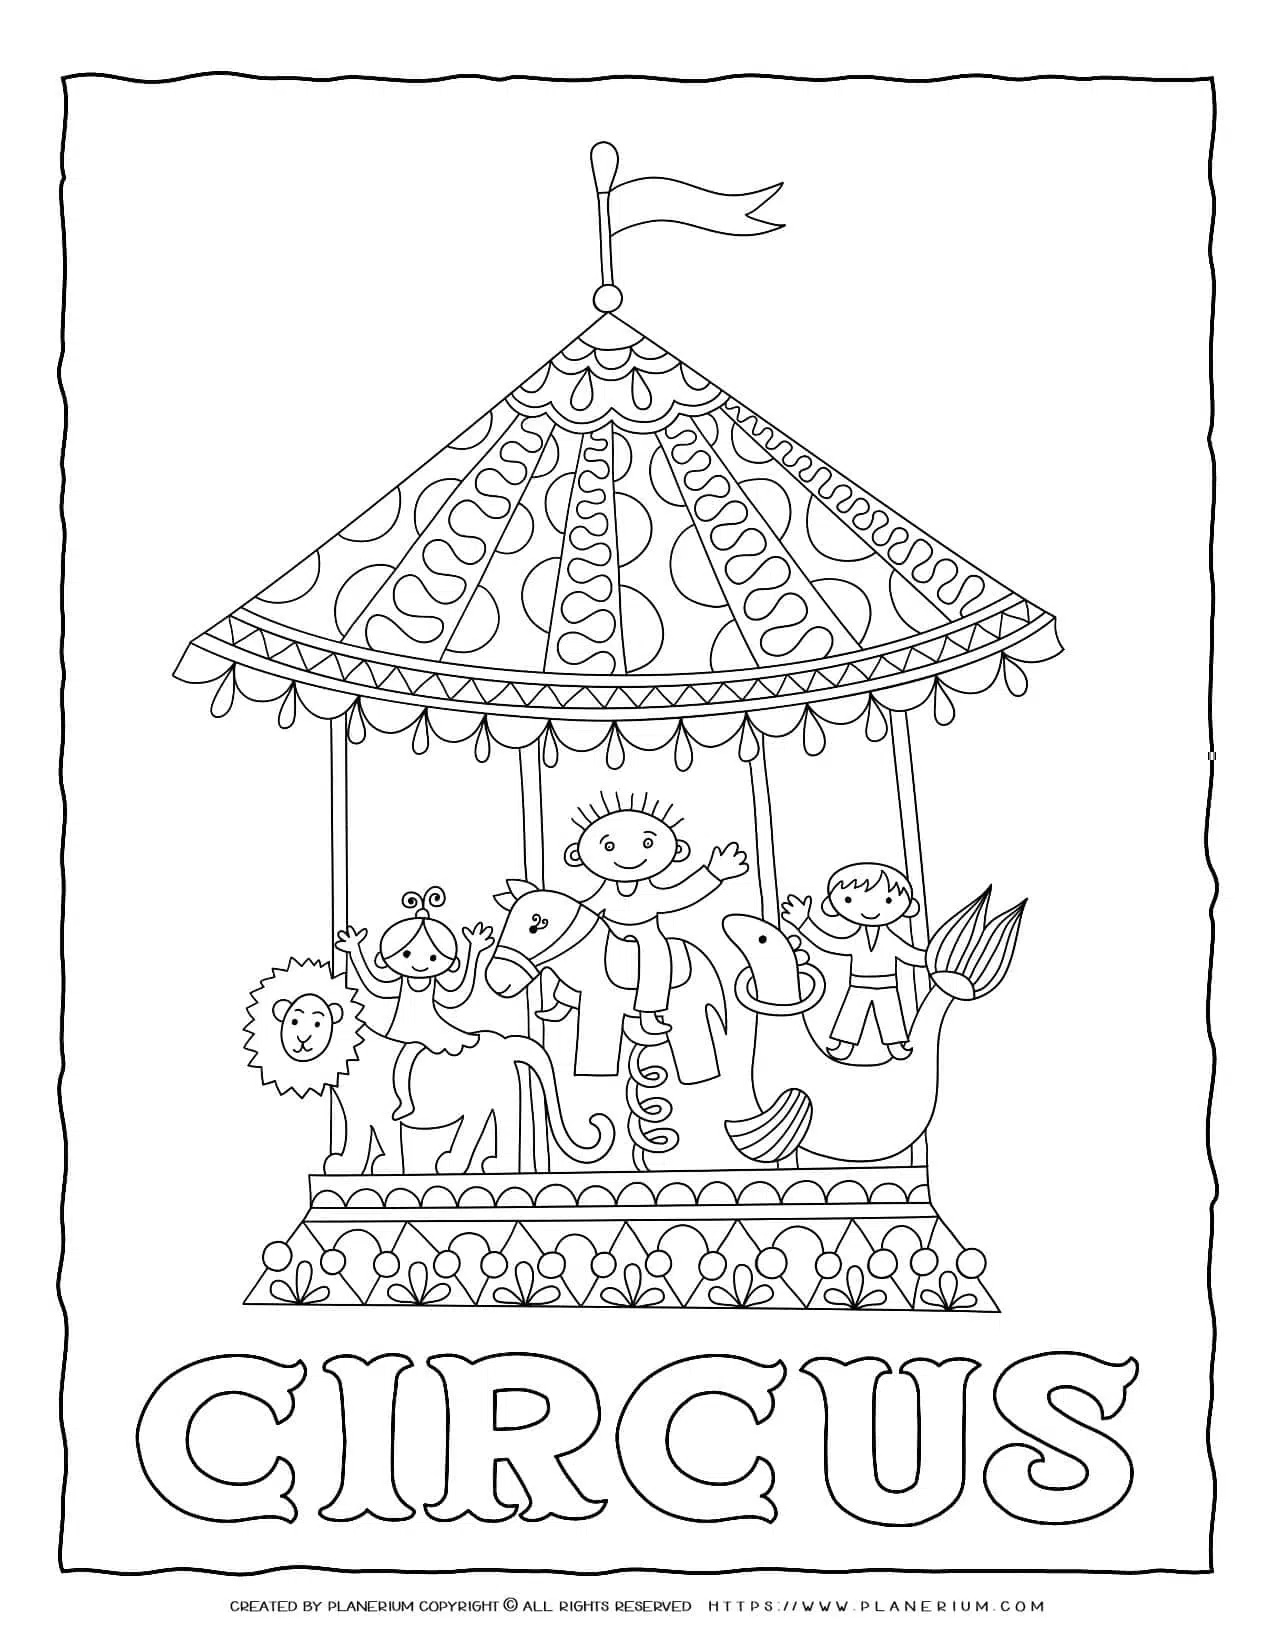 Circus coloring page